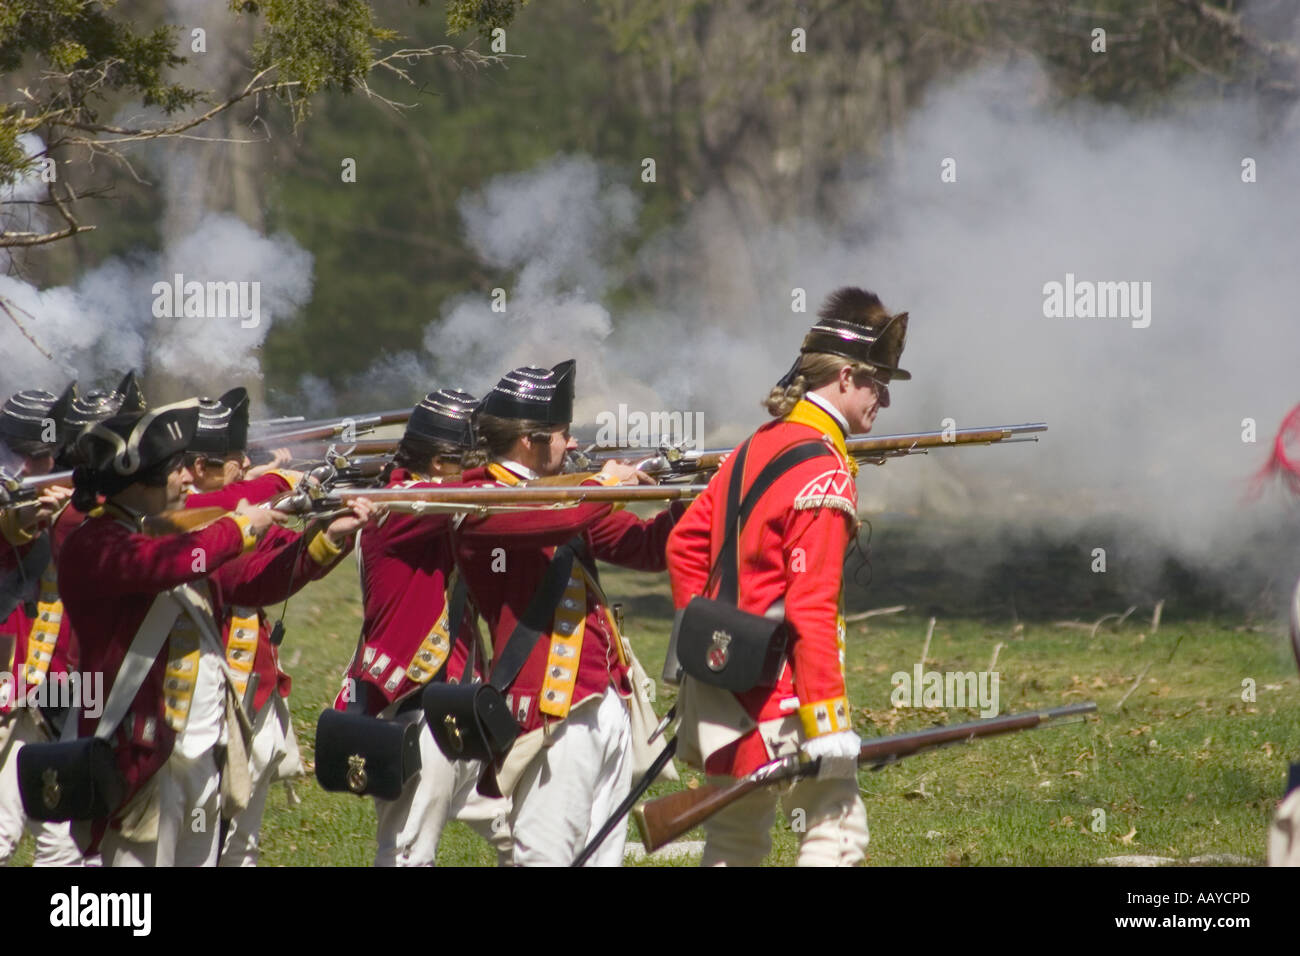 advancing British troops during battle road historical reenactment at Minute Man National Historical Park Concord Massachusetts Stock Photo